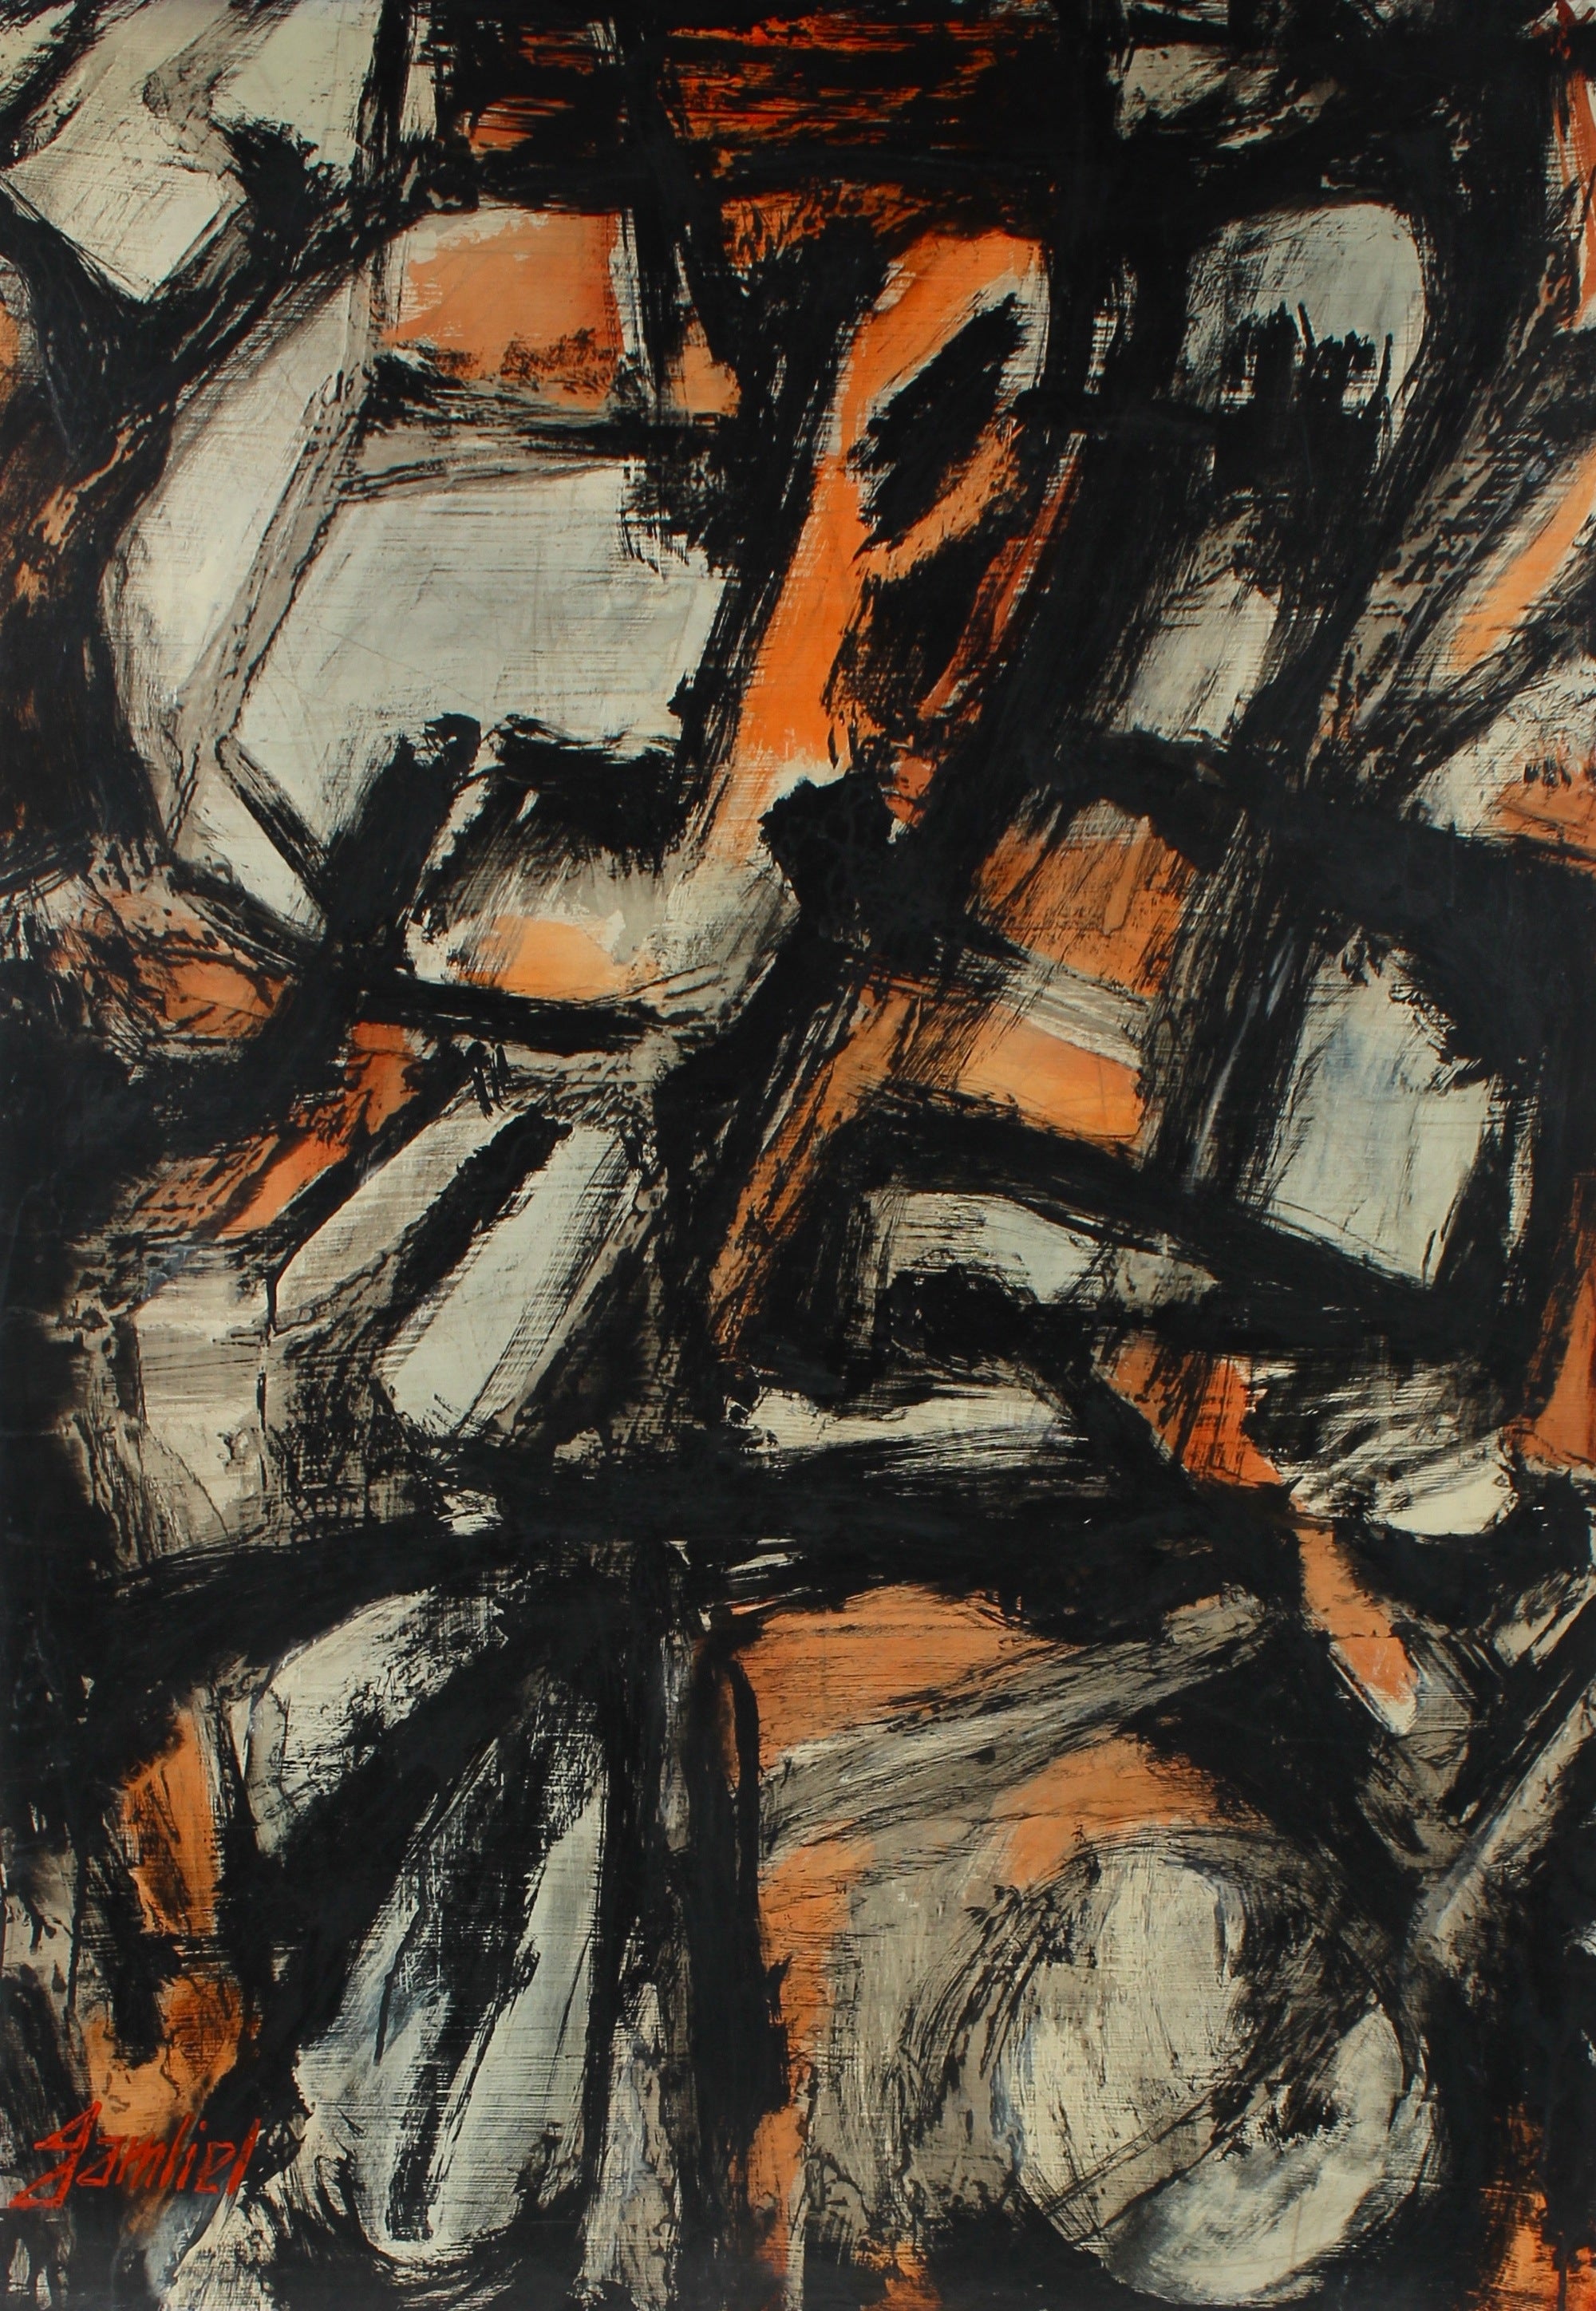 Orange & Black Abstract Expressionist Paint on Masonite<br><br>#95840